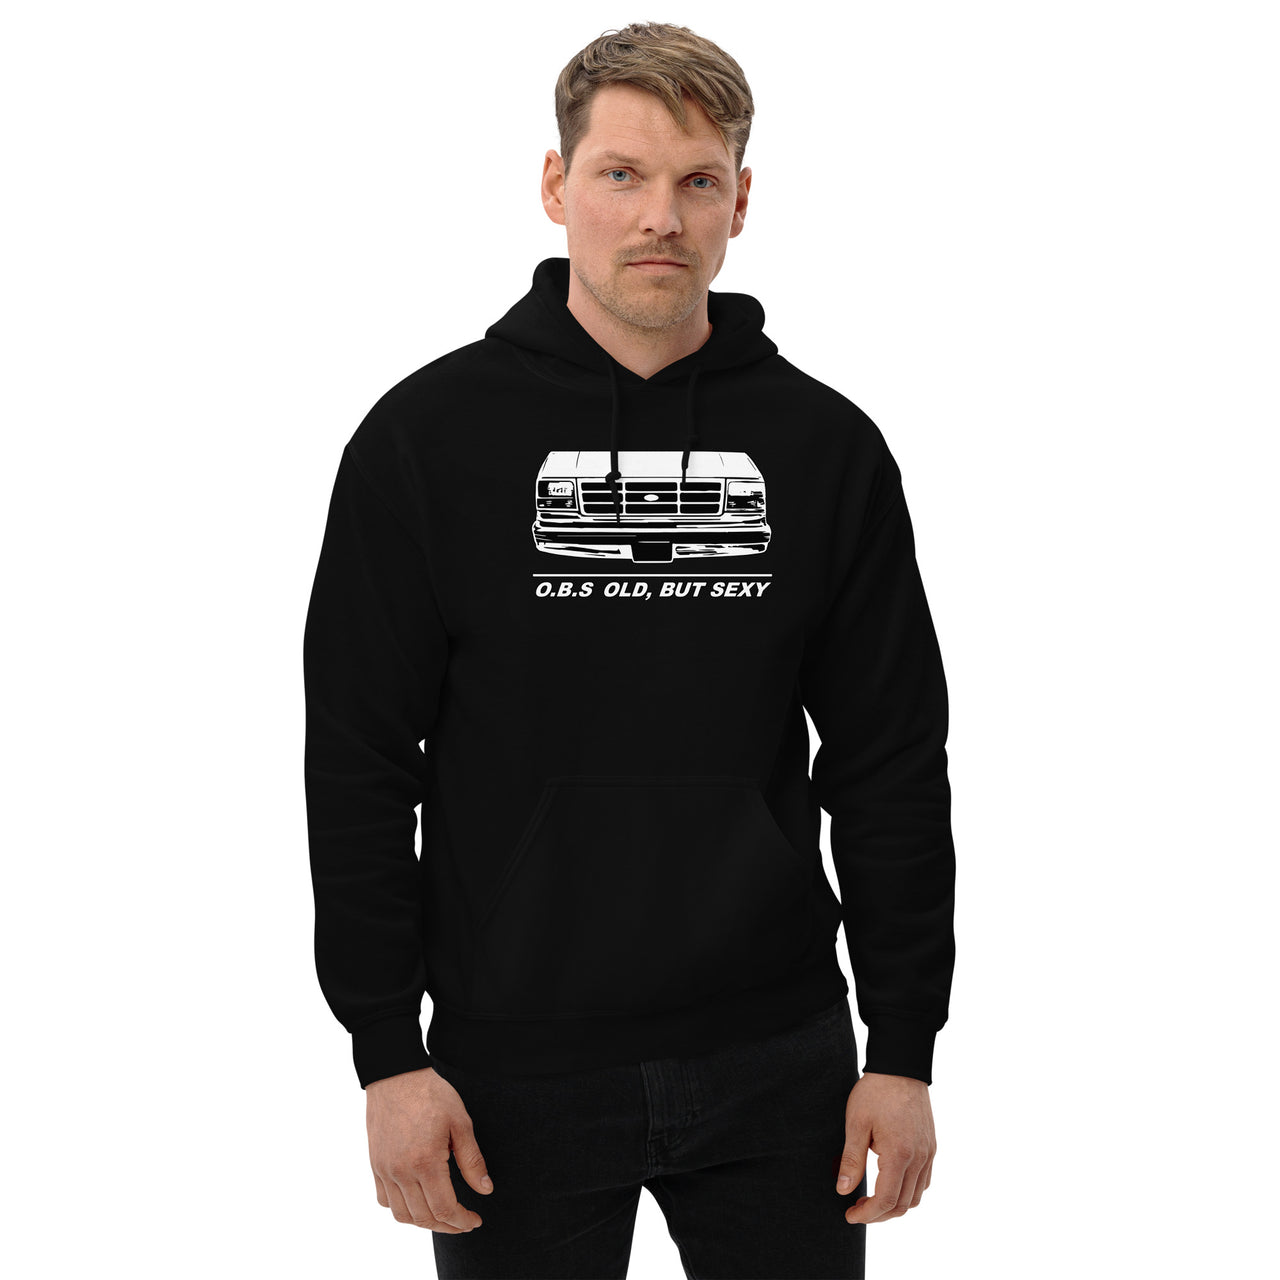 OBS Truck - Old, But Sexy Hoodie modeled in black